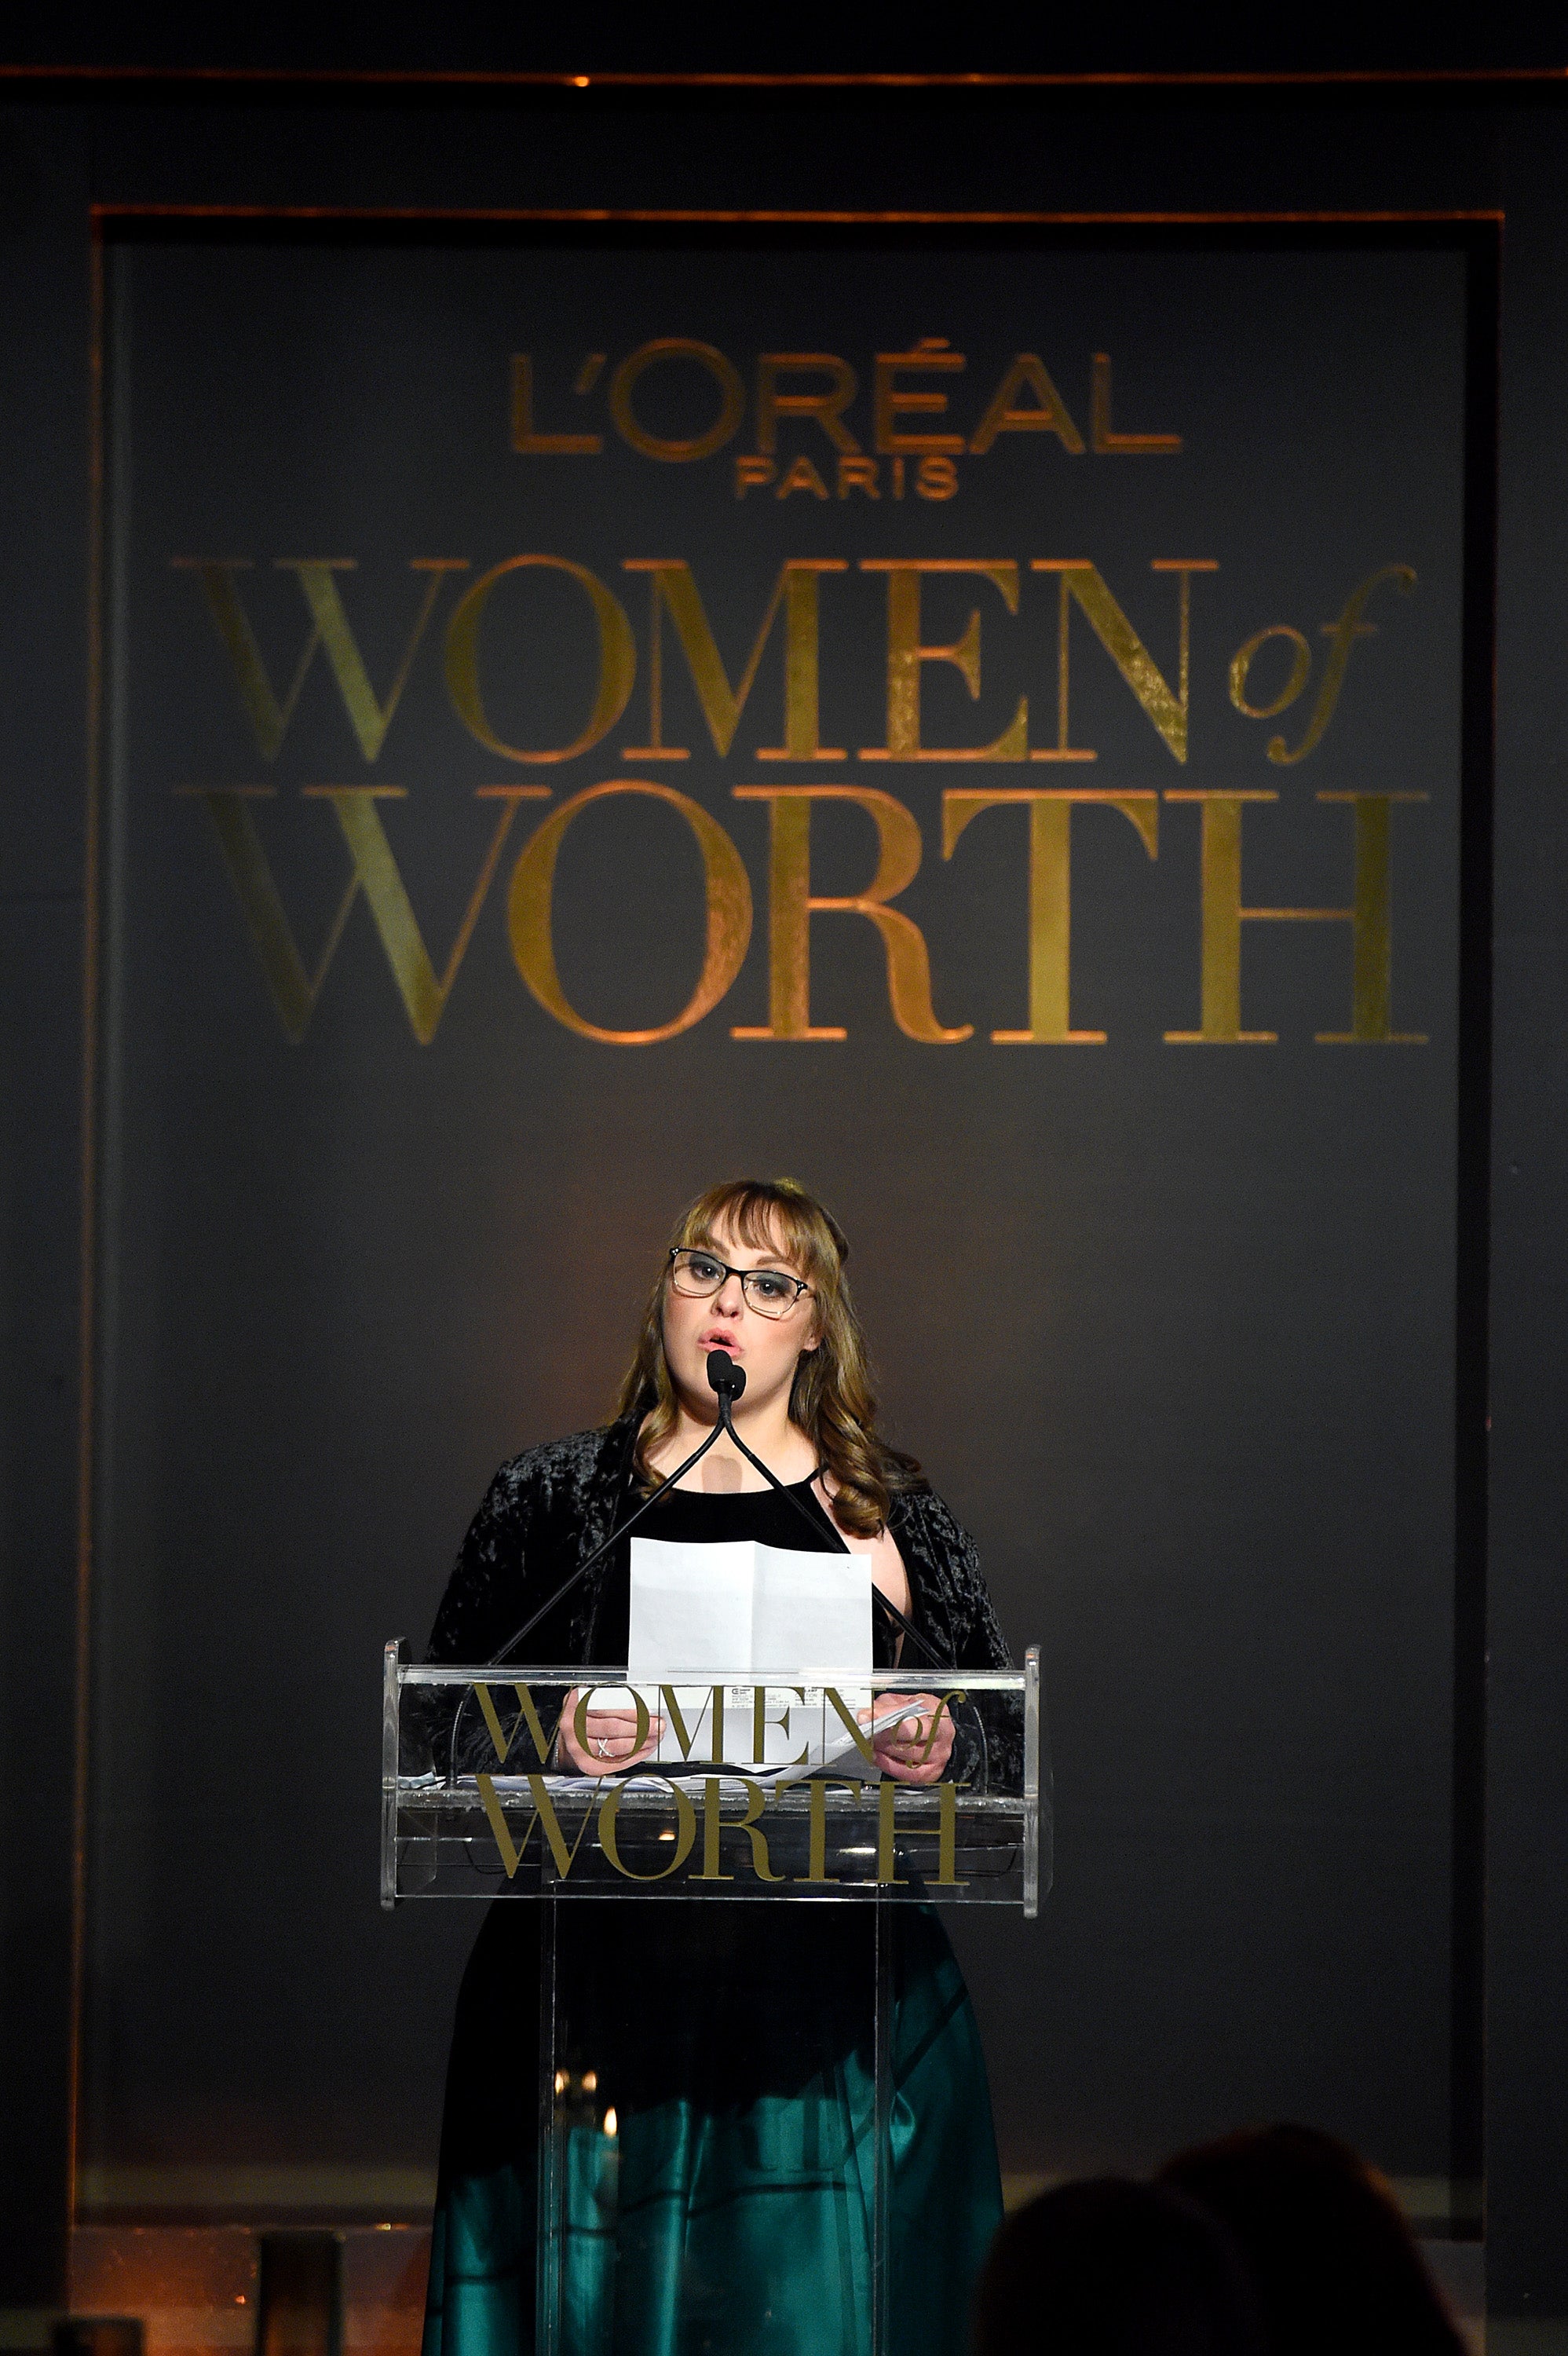 Brittany accepting her award at the L'Oreal Woman of Worth Gala.